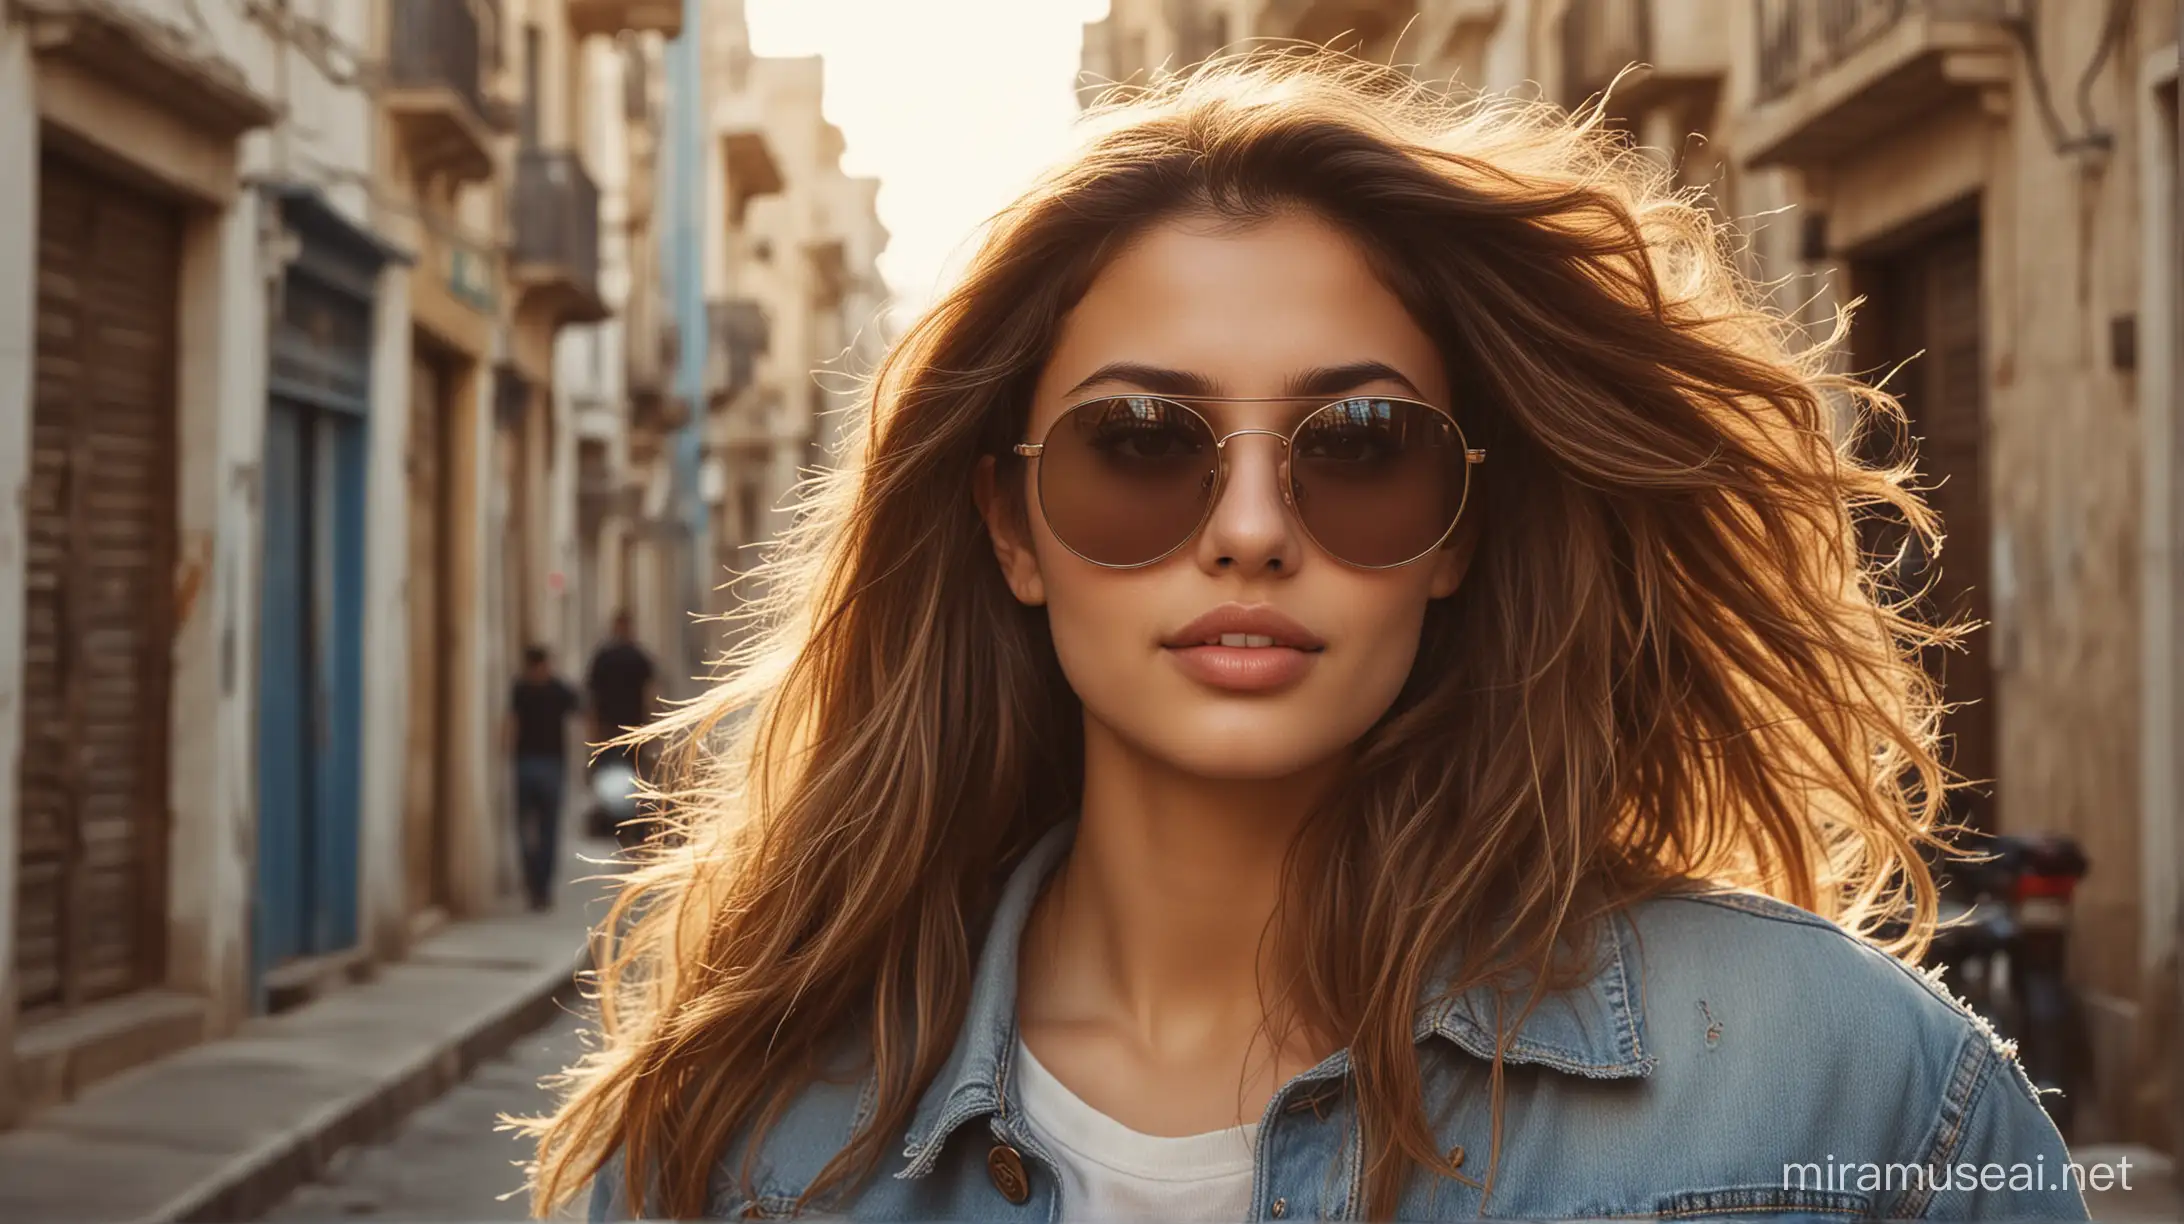 "A photorealistic portrait of a 25-year-old brunette Algerian girl with long, flowing light brown hair and striking hazel eyes, wearing sunglasses and aVintage-inspired denim: Retro washes, distressed details, and high-waisted silhouettes are making a comeback., set in Algiers Center. She should have a natural, approachable expression and be illuminated by soft, golden-hour sunlight. The background should depict a scenic outdoor setting, perhaps the bustling streets of Algiers with its iconic architecture. Capture this image with a high-resolution photograph using an 85mm lens for a flattering perspective, amidst the vibrant energy of the city center with a group of people passing by."